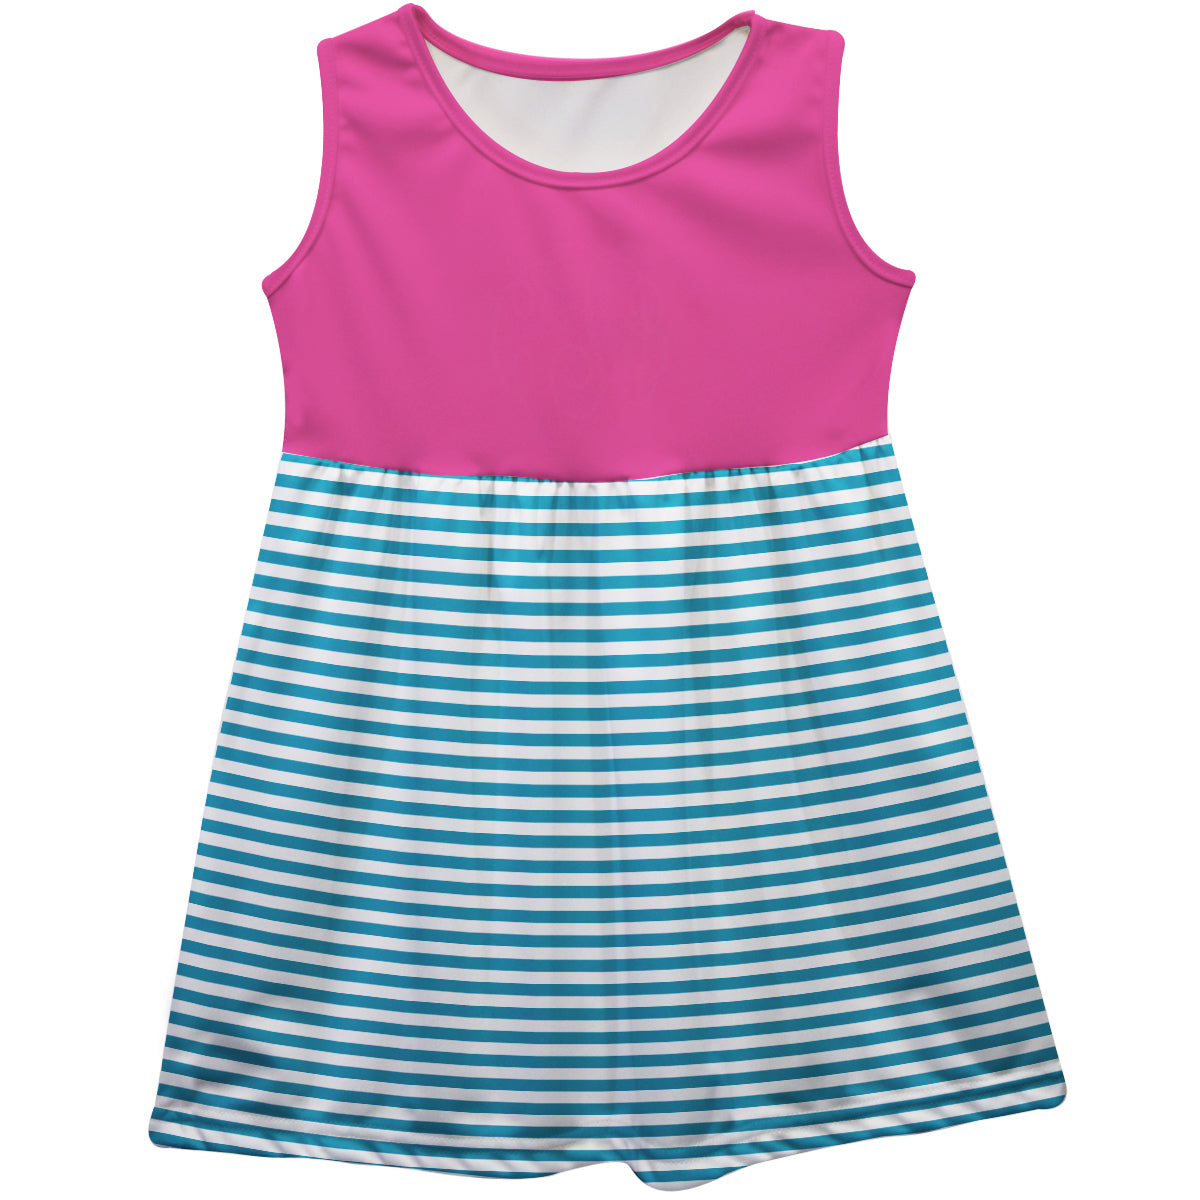 Personalized Monogram Pink White and Light Blue Stripes Tank Dress - Wimziy&Co.